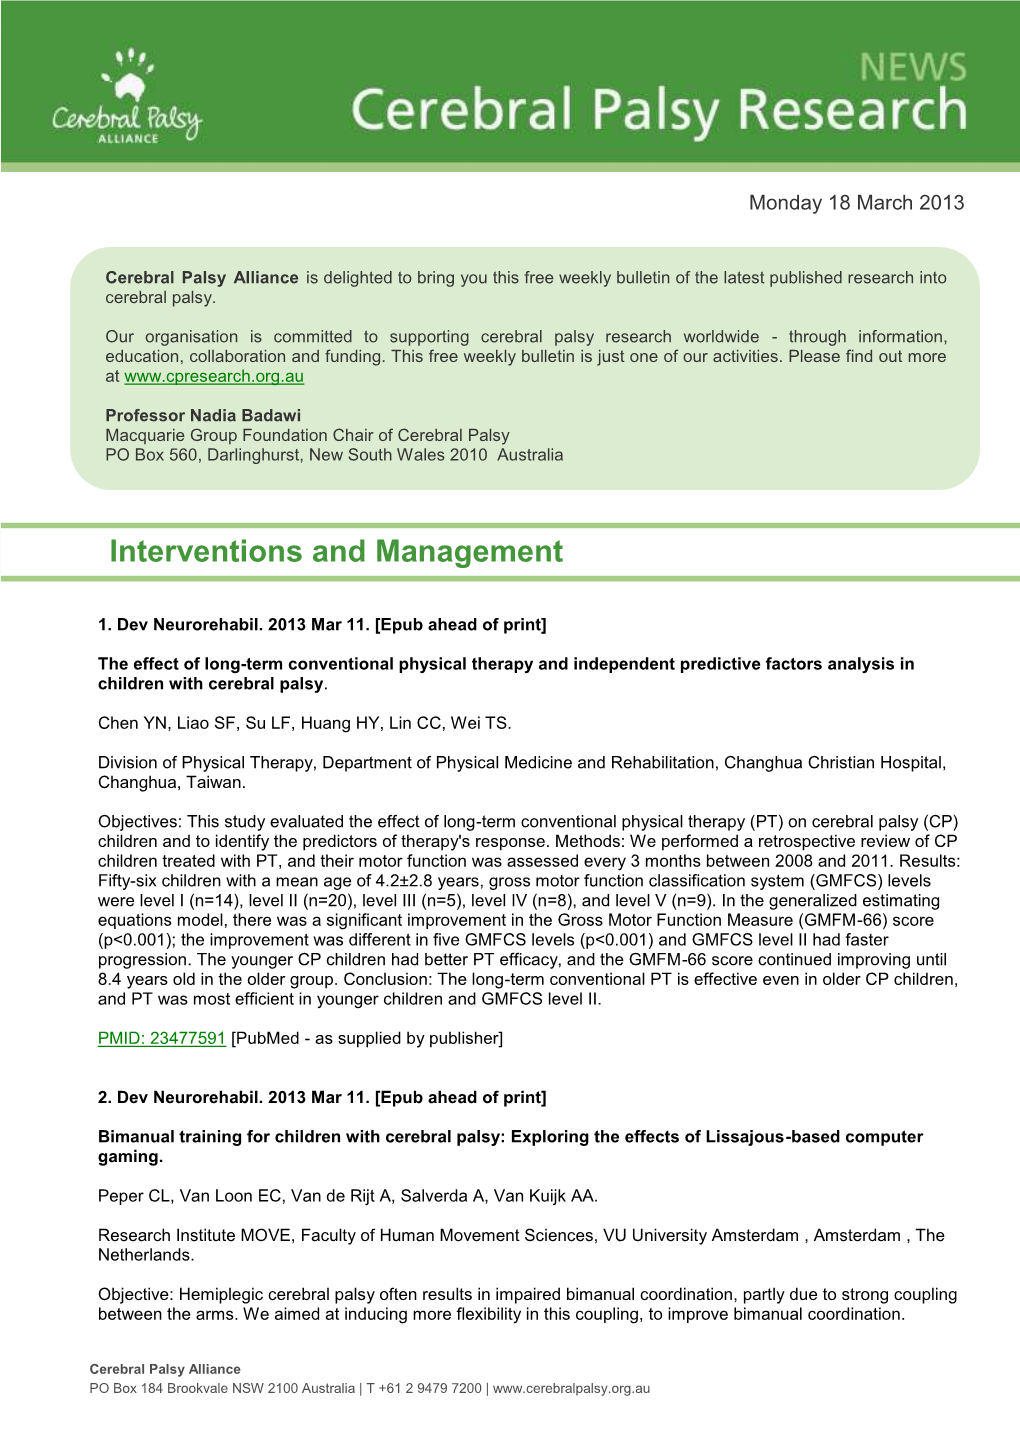 Interventions and Management